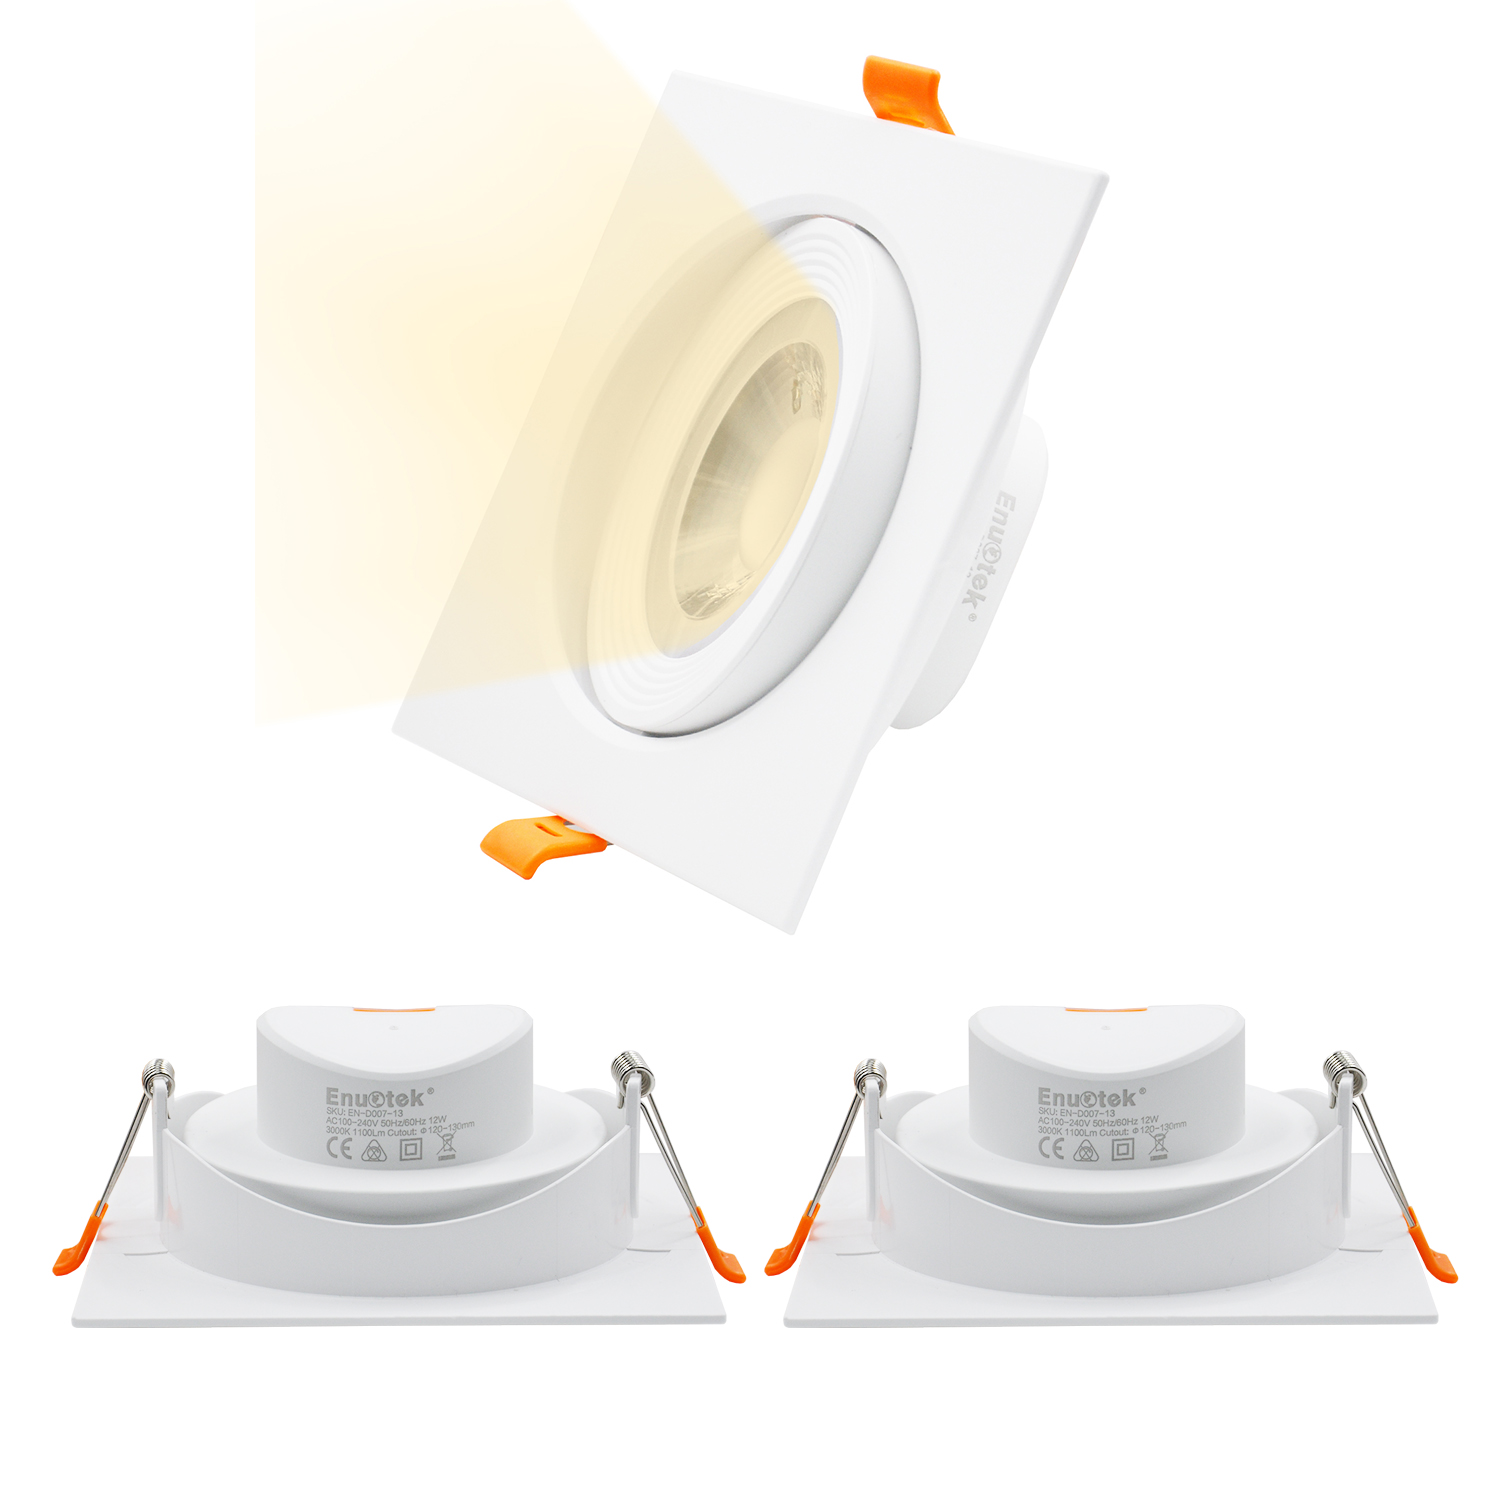 Square White 12w Led Spot Lamps Angled Recessed Ceiling Downlights 40 Beam Angel Downlights Warm White 3000k For Sloped Ceiling Cut Hole Diameter